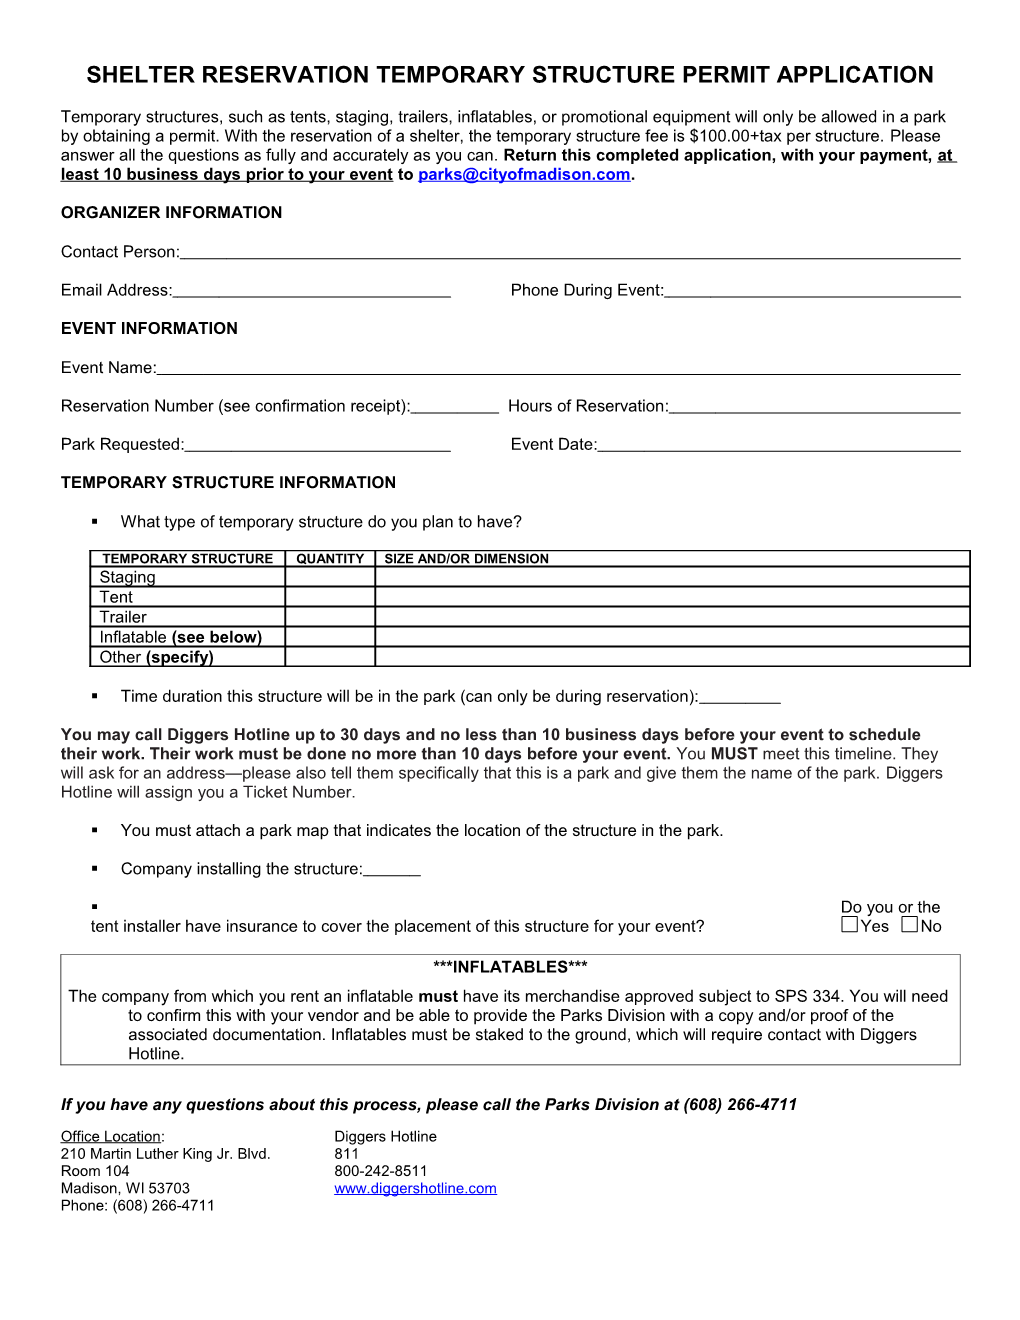 SHELTER RESERVATION Temporary Structure Permit Application